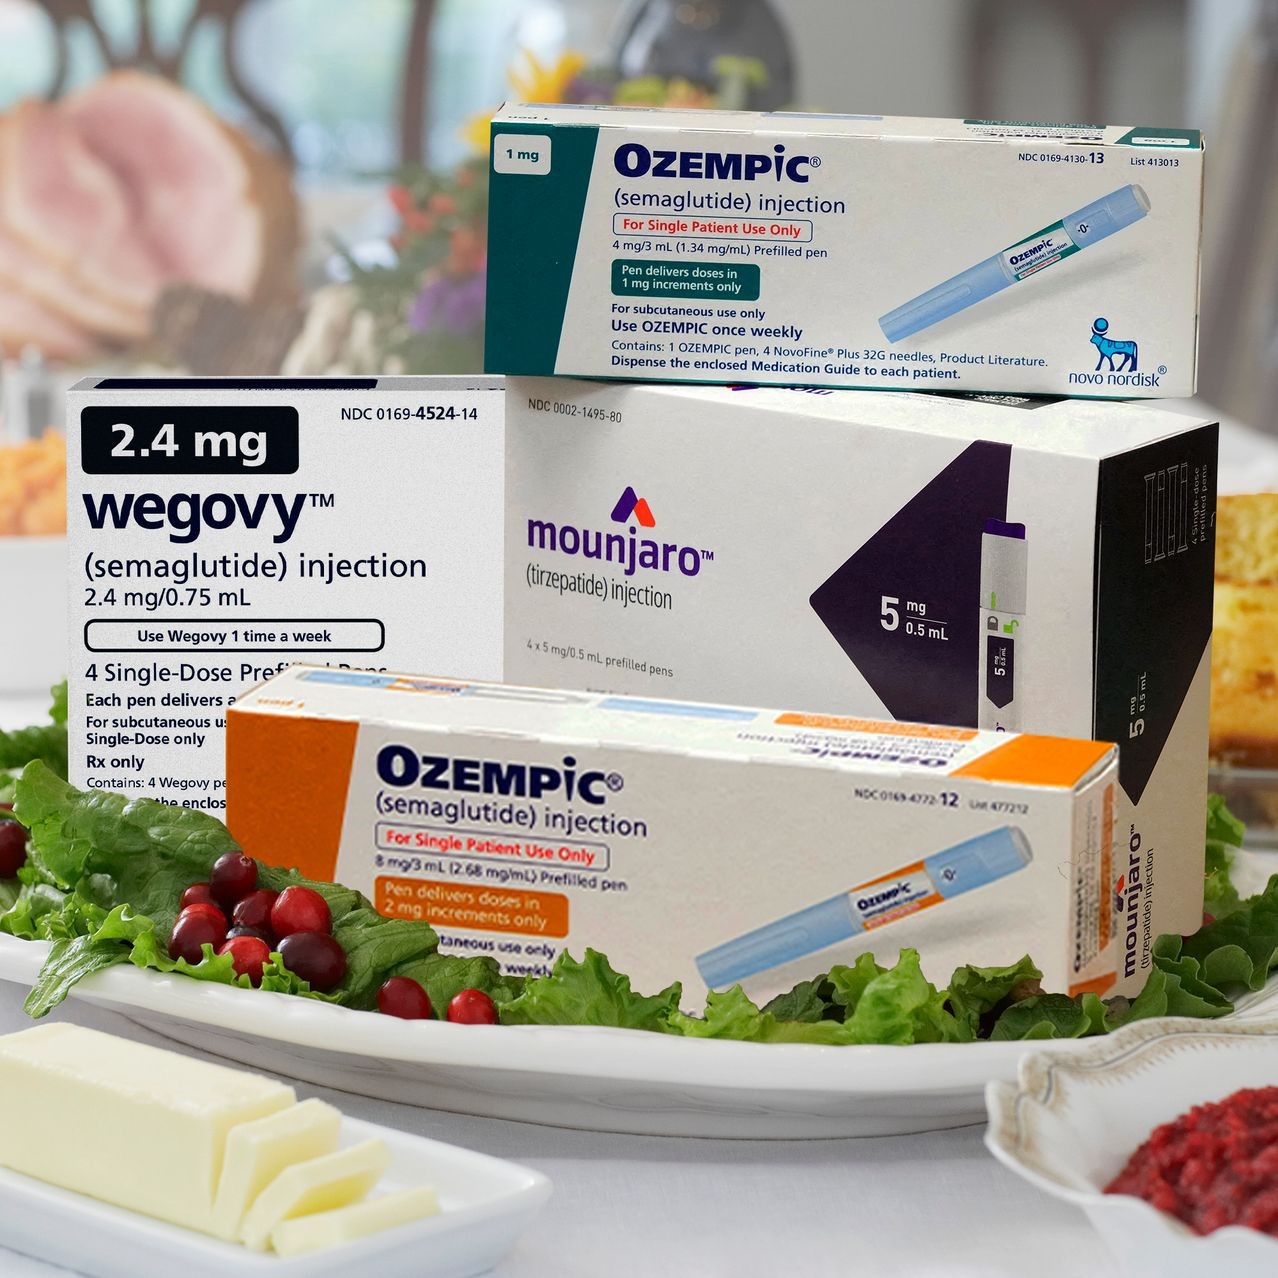 Whatsapp +61279120109 where to buy ozempic for weight loss,buy ozempic dubai